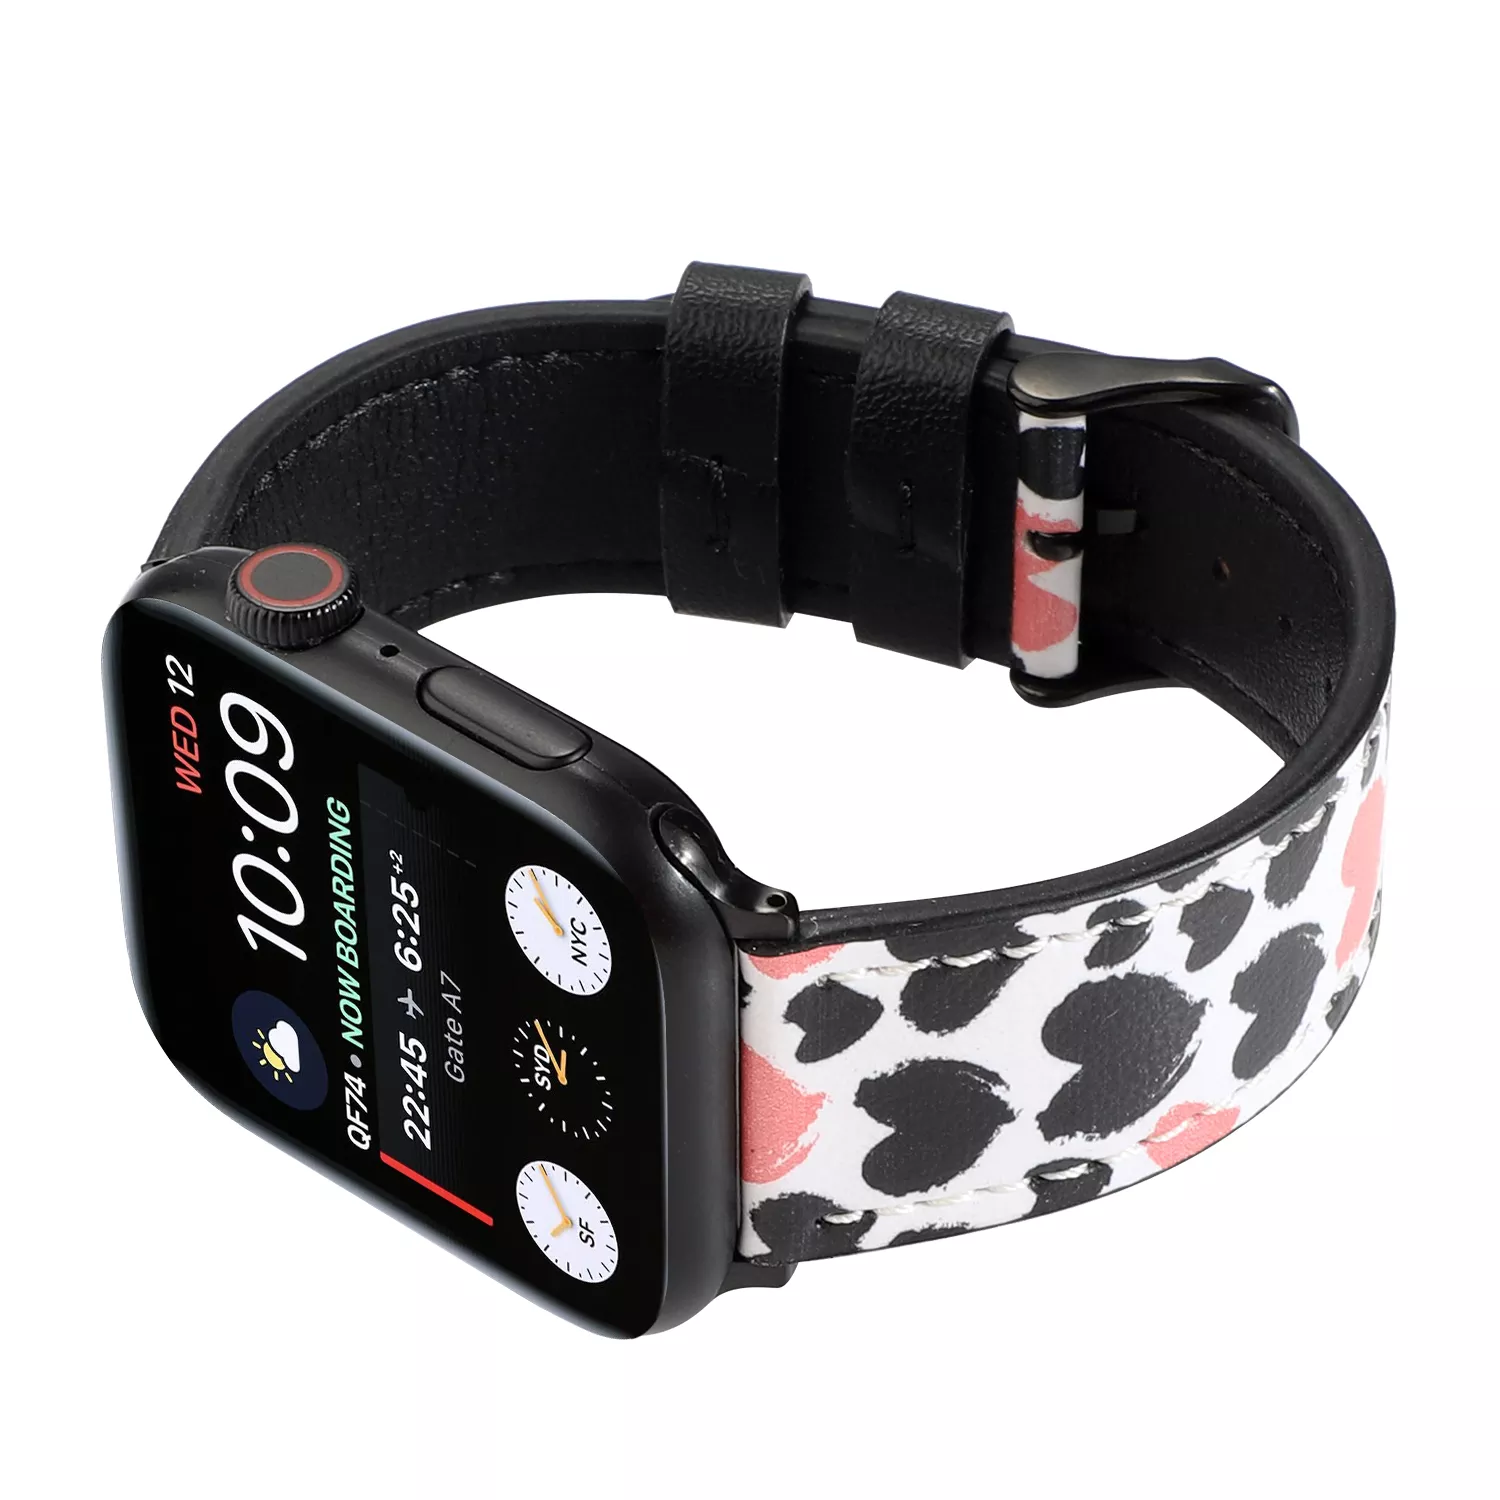 Cute Leather Heart Printed Watchband For Iwatch Series 1 2 3 4 5 6 SE - $22.00